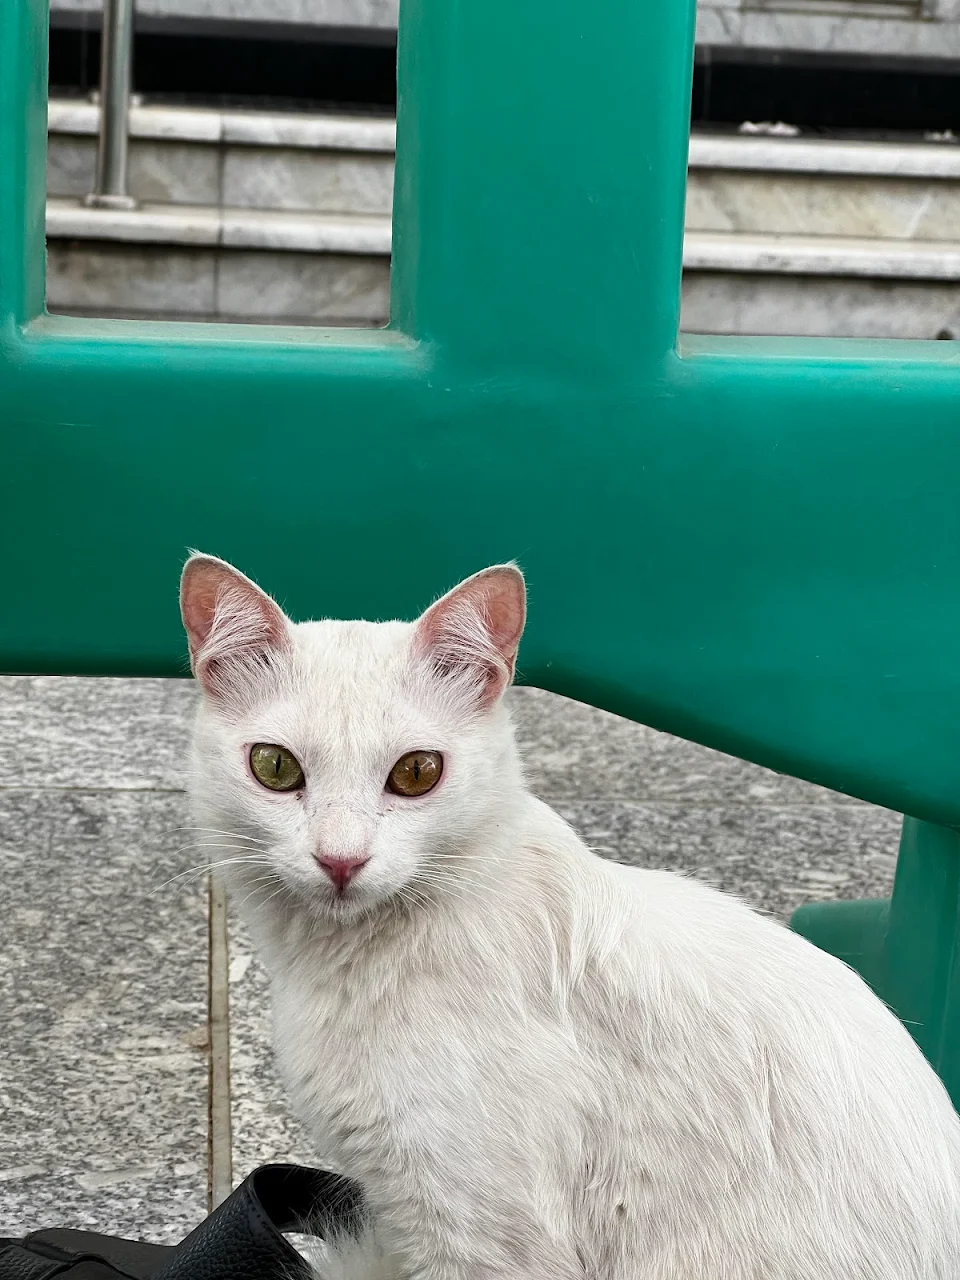 Saw a heterochromic cat the other day